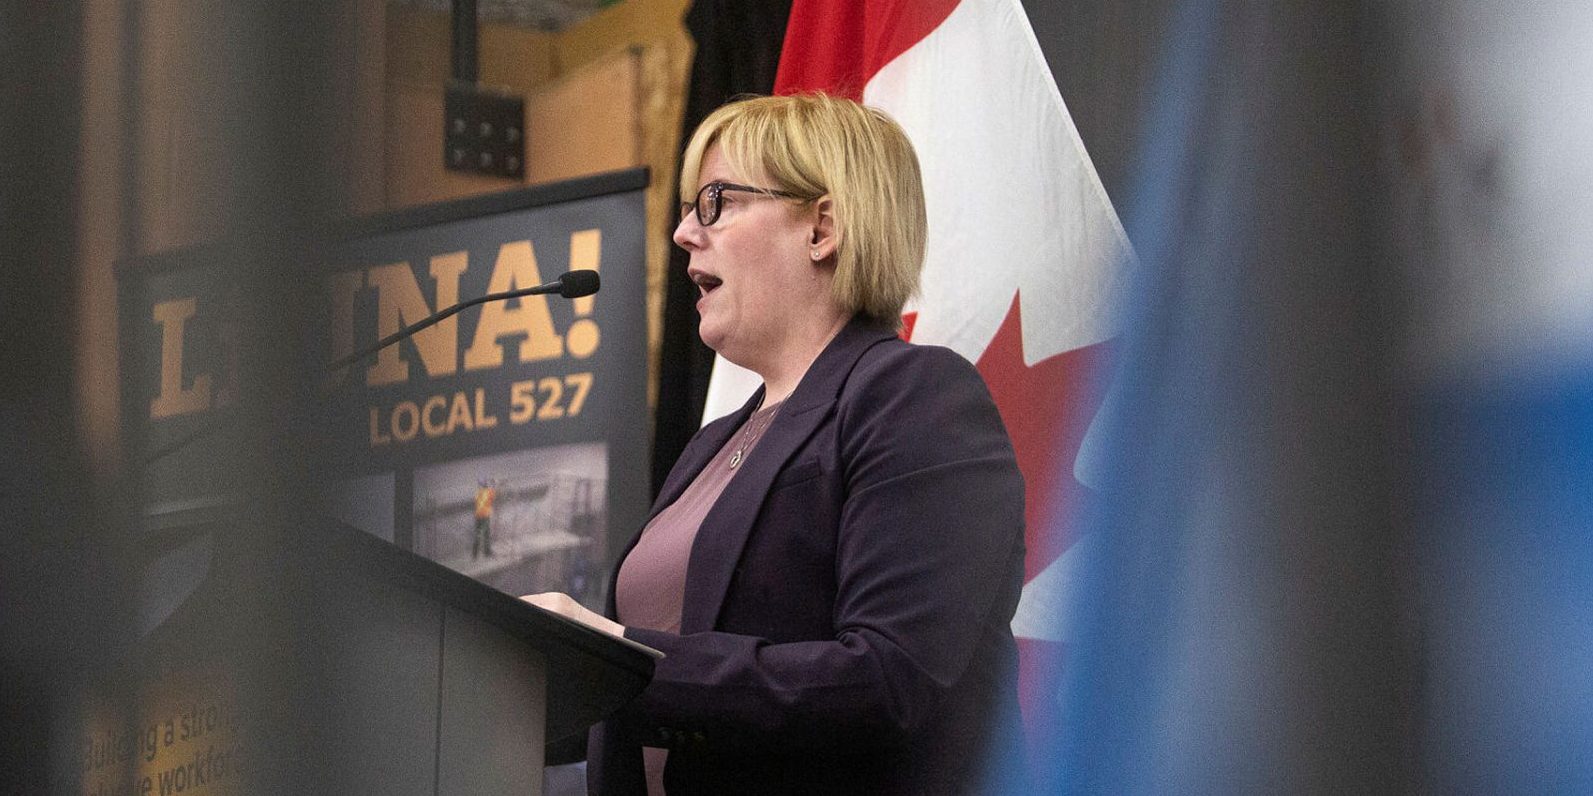 Minister of Employment, Workforce Development and Disability Inclusion Carla Qualtrough makes an announcement at the LiUNA local 527 training centre on  Nov. 17, 2022, outlining funding for apprenticeship programs in the skilled trades. Andrew Meade